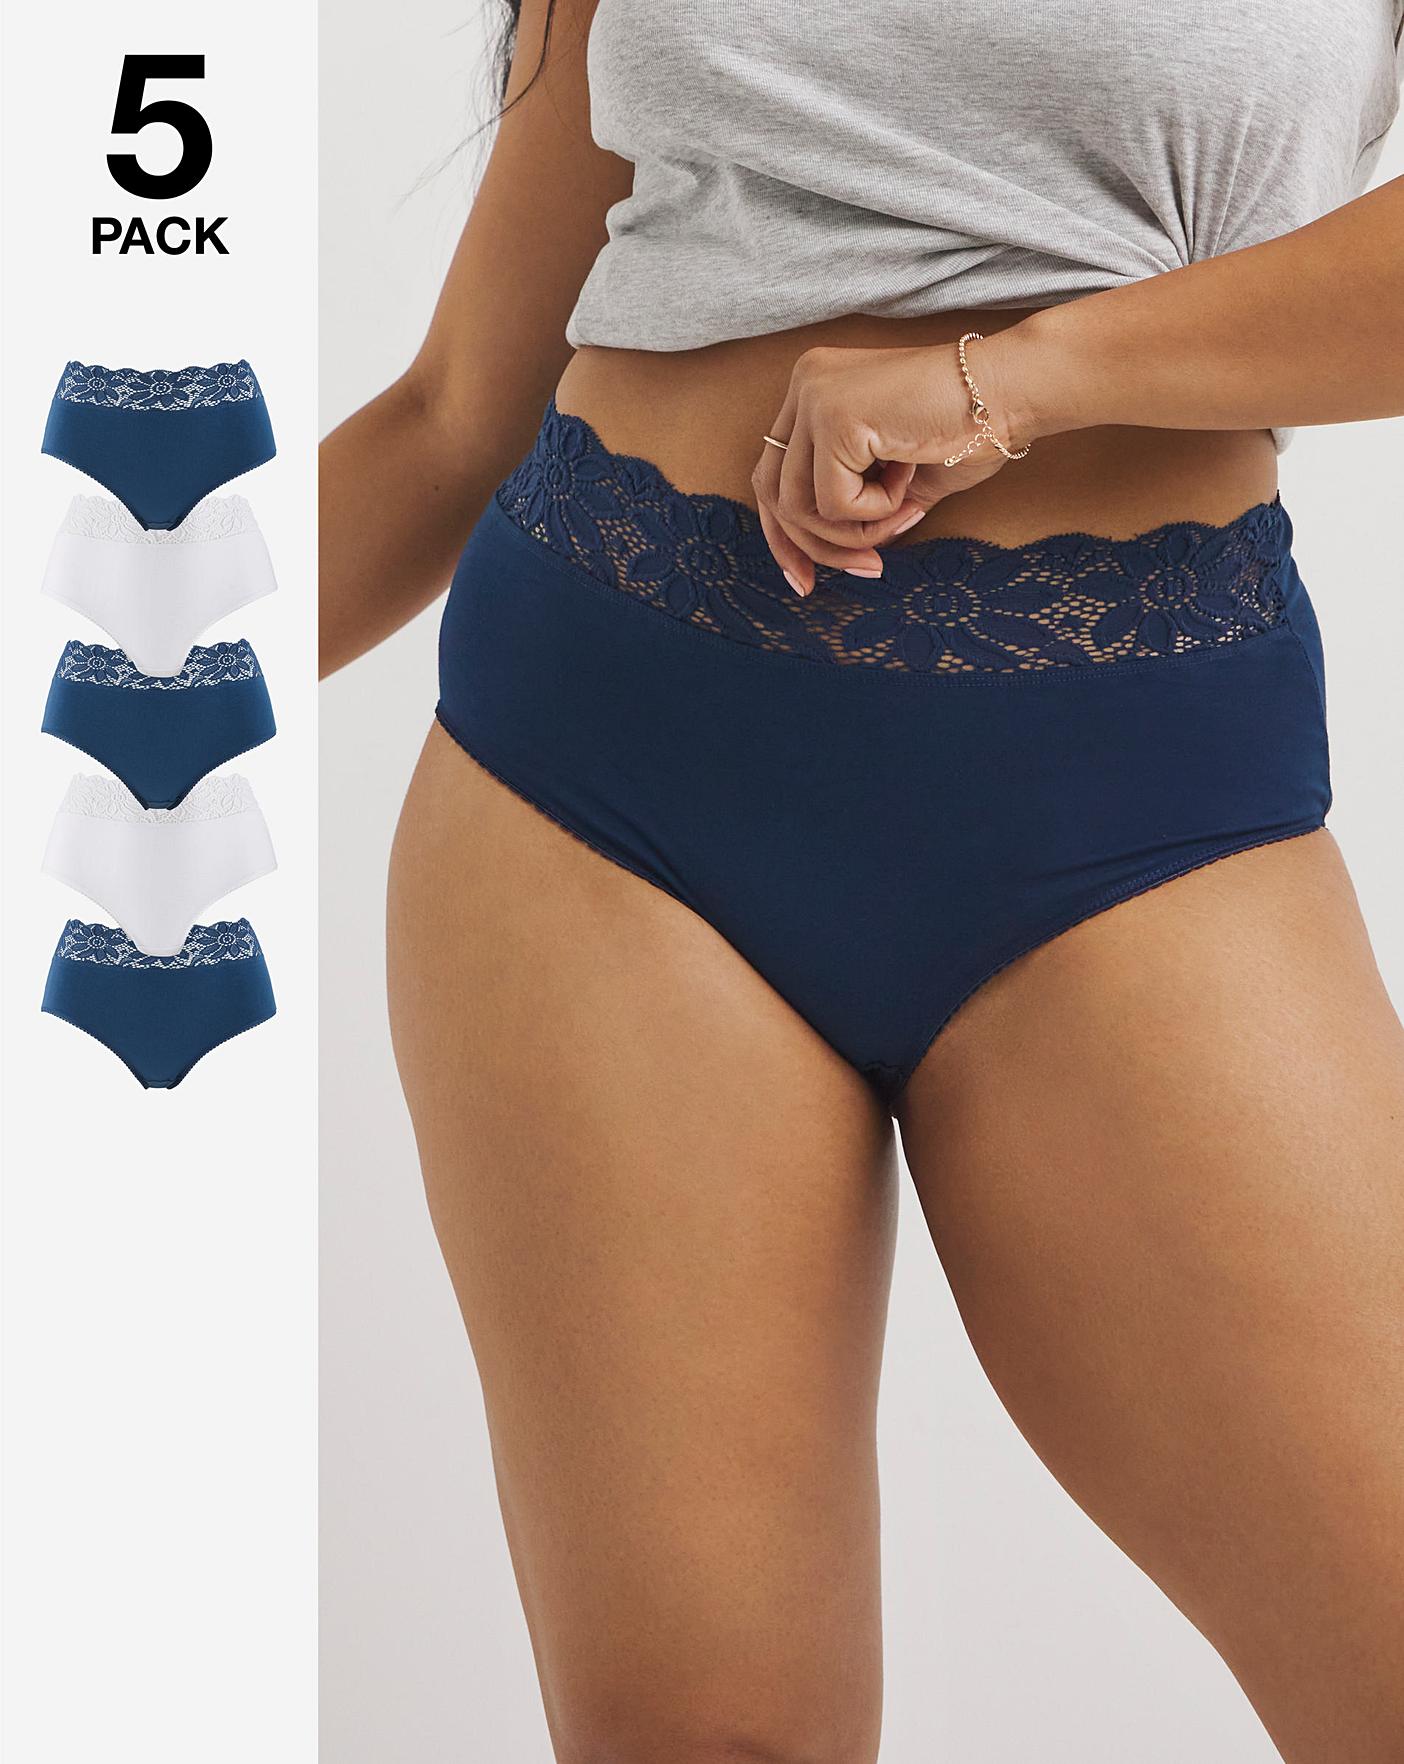 5 Pack Navy Lace Top Full Fit Briefs